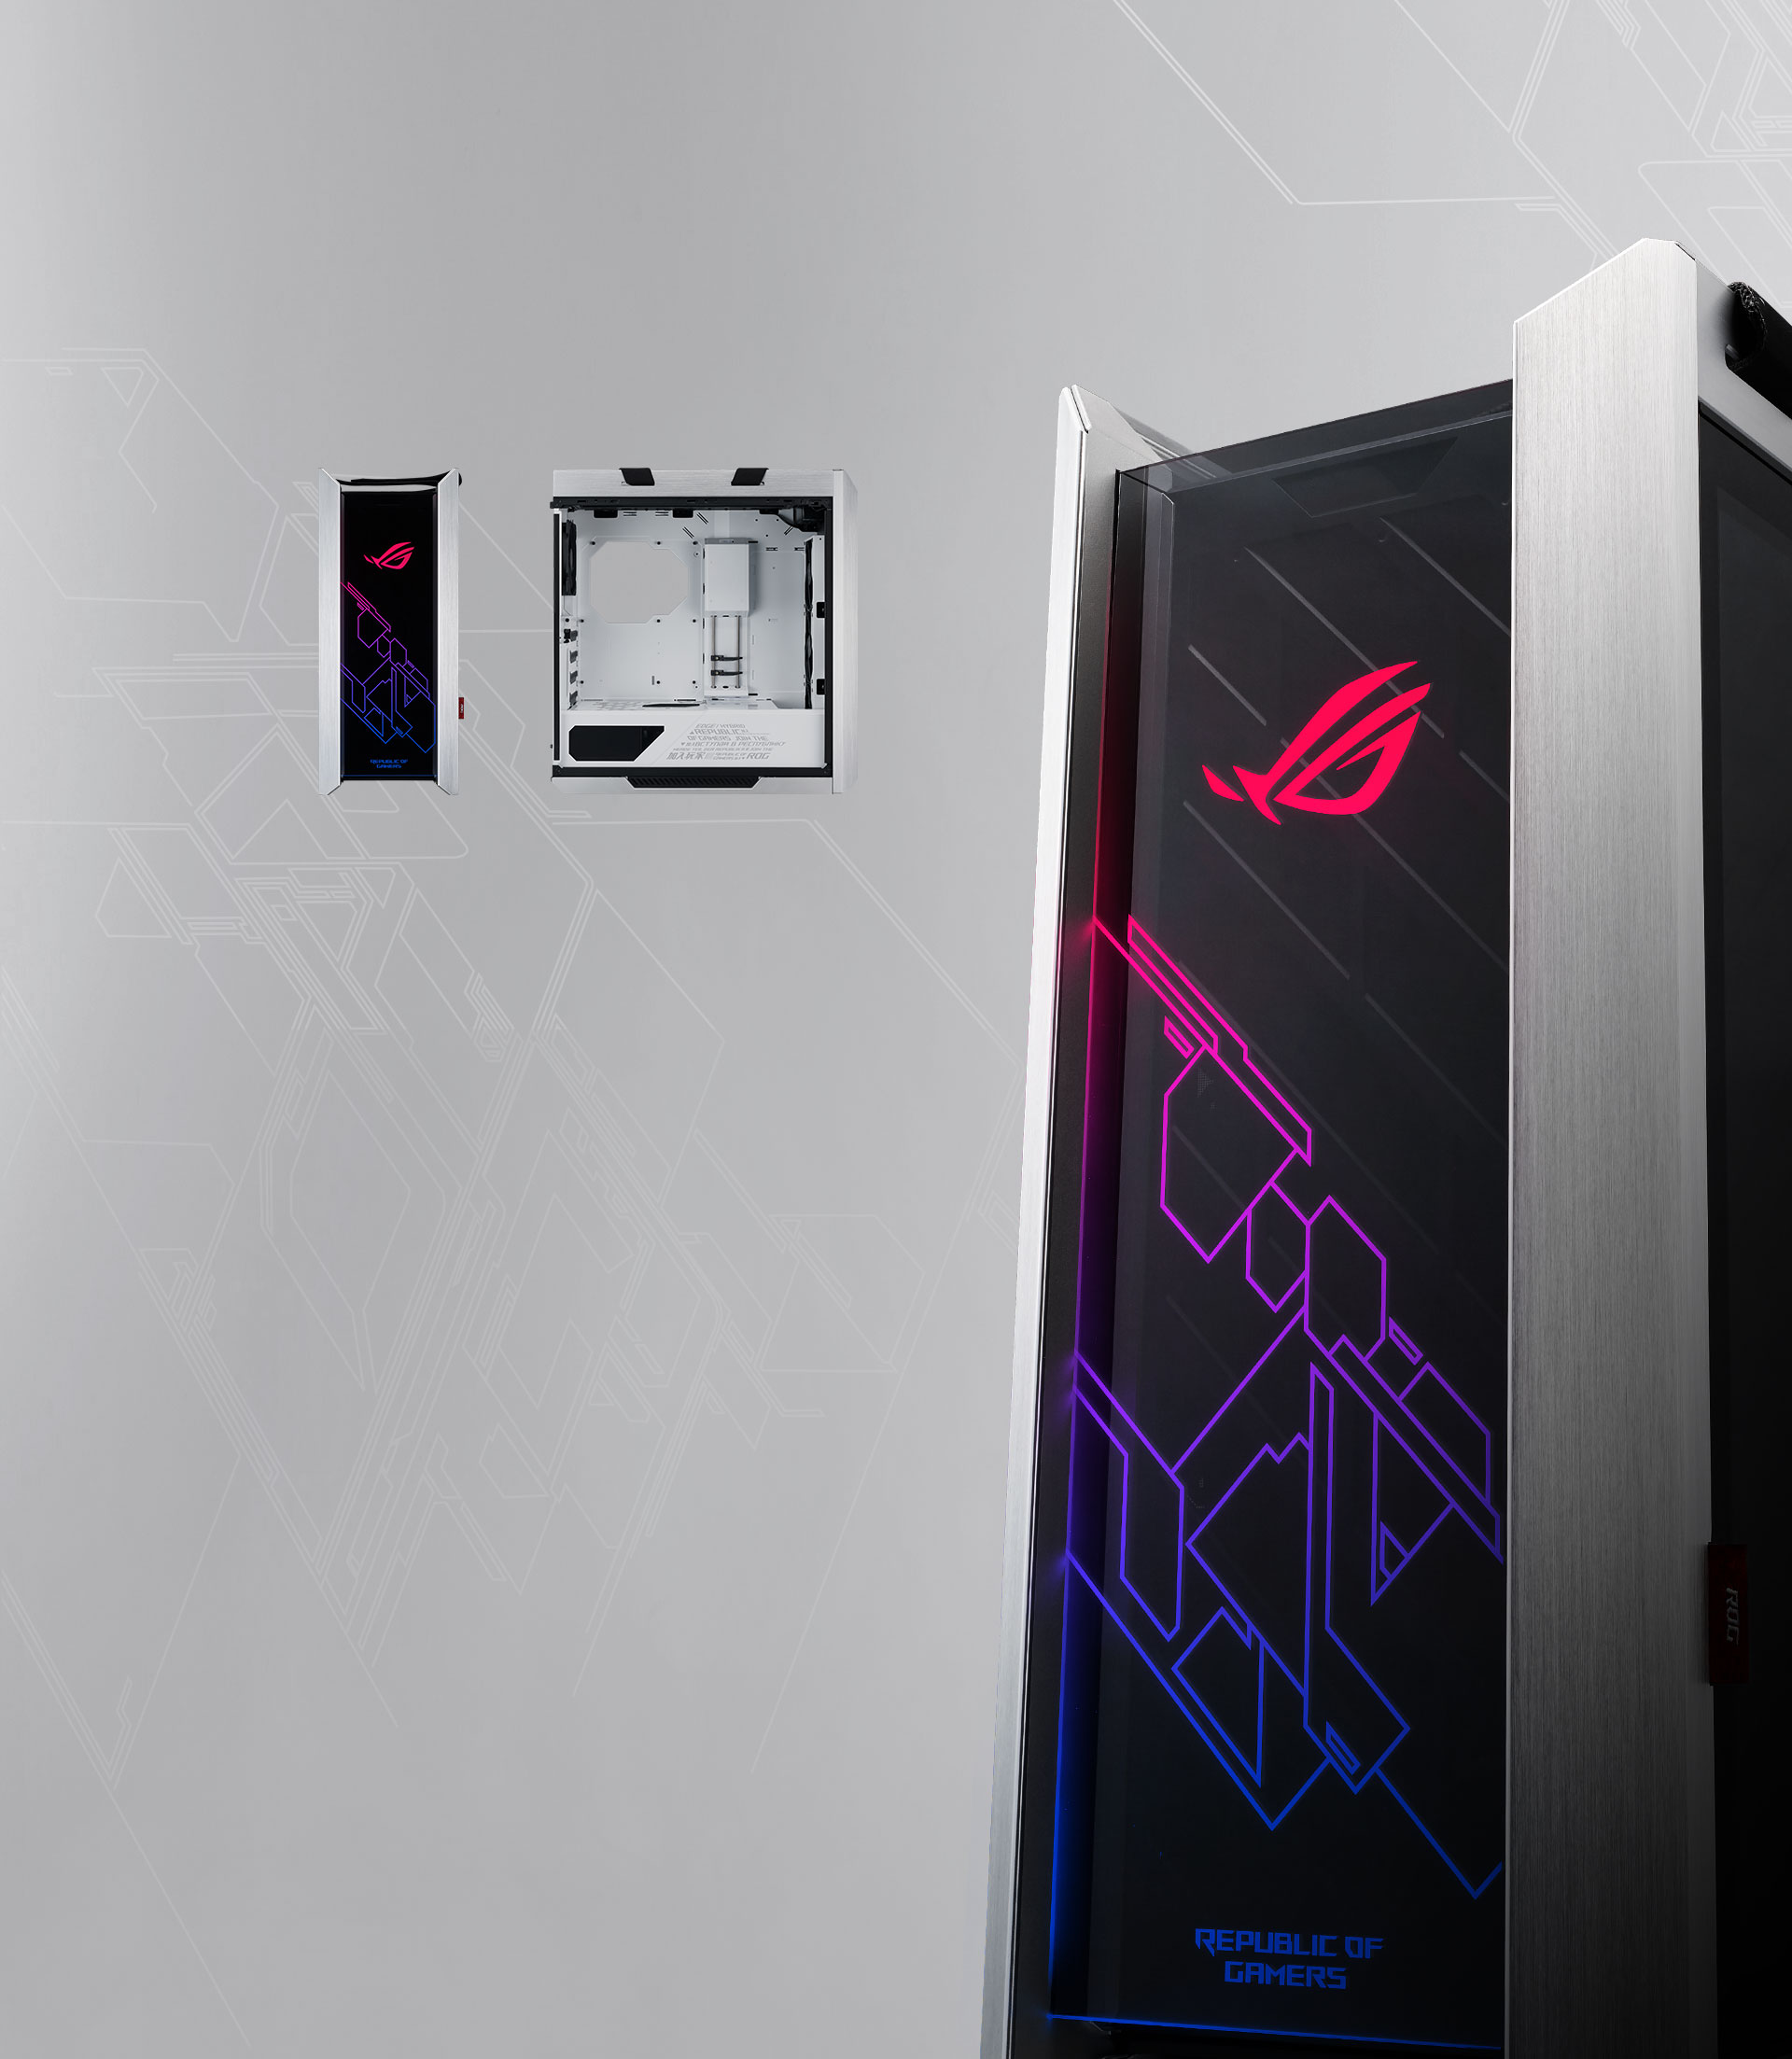 ROG Strix Helios White Edition with three different angles view to show its premium design and white aesthetics